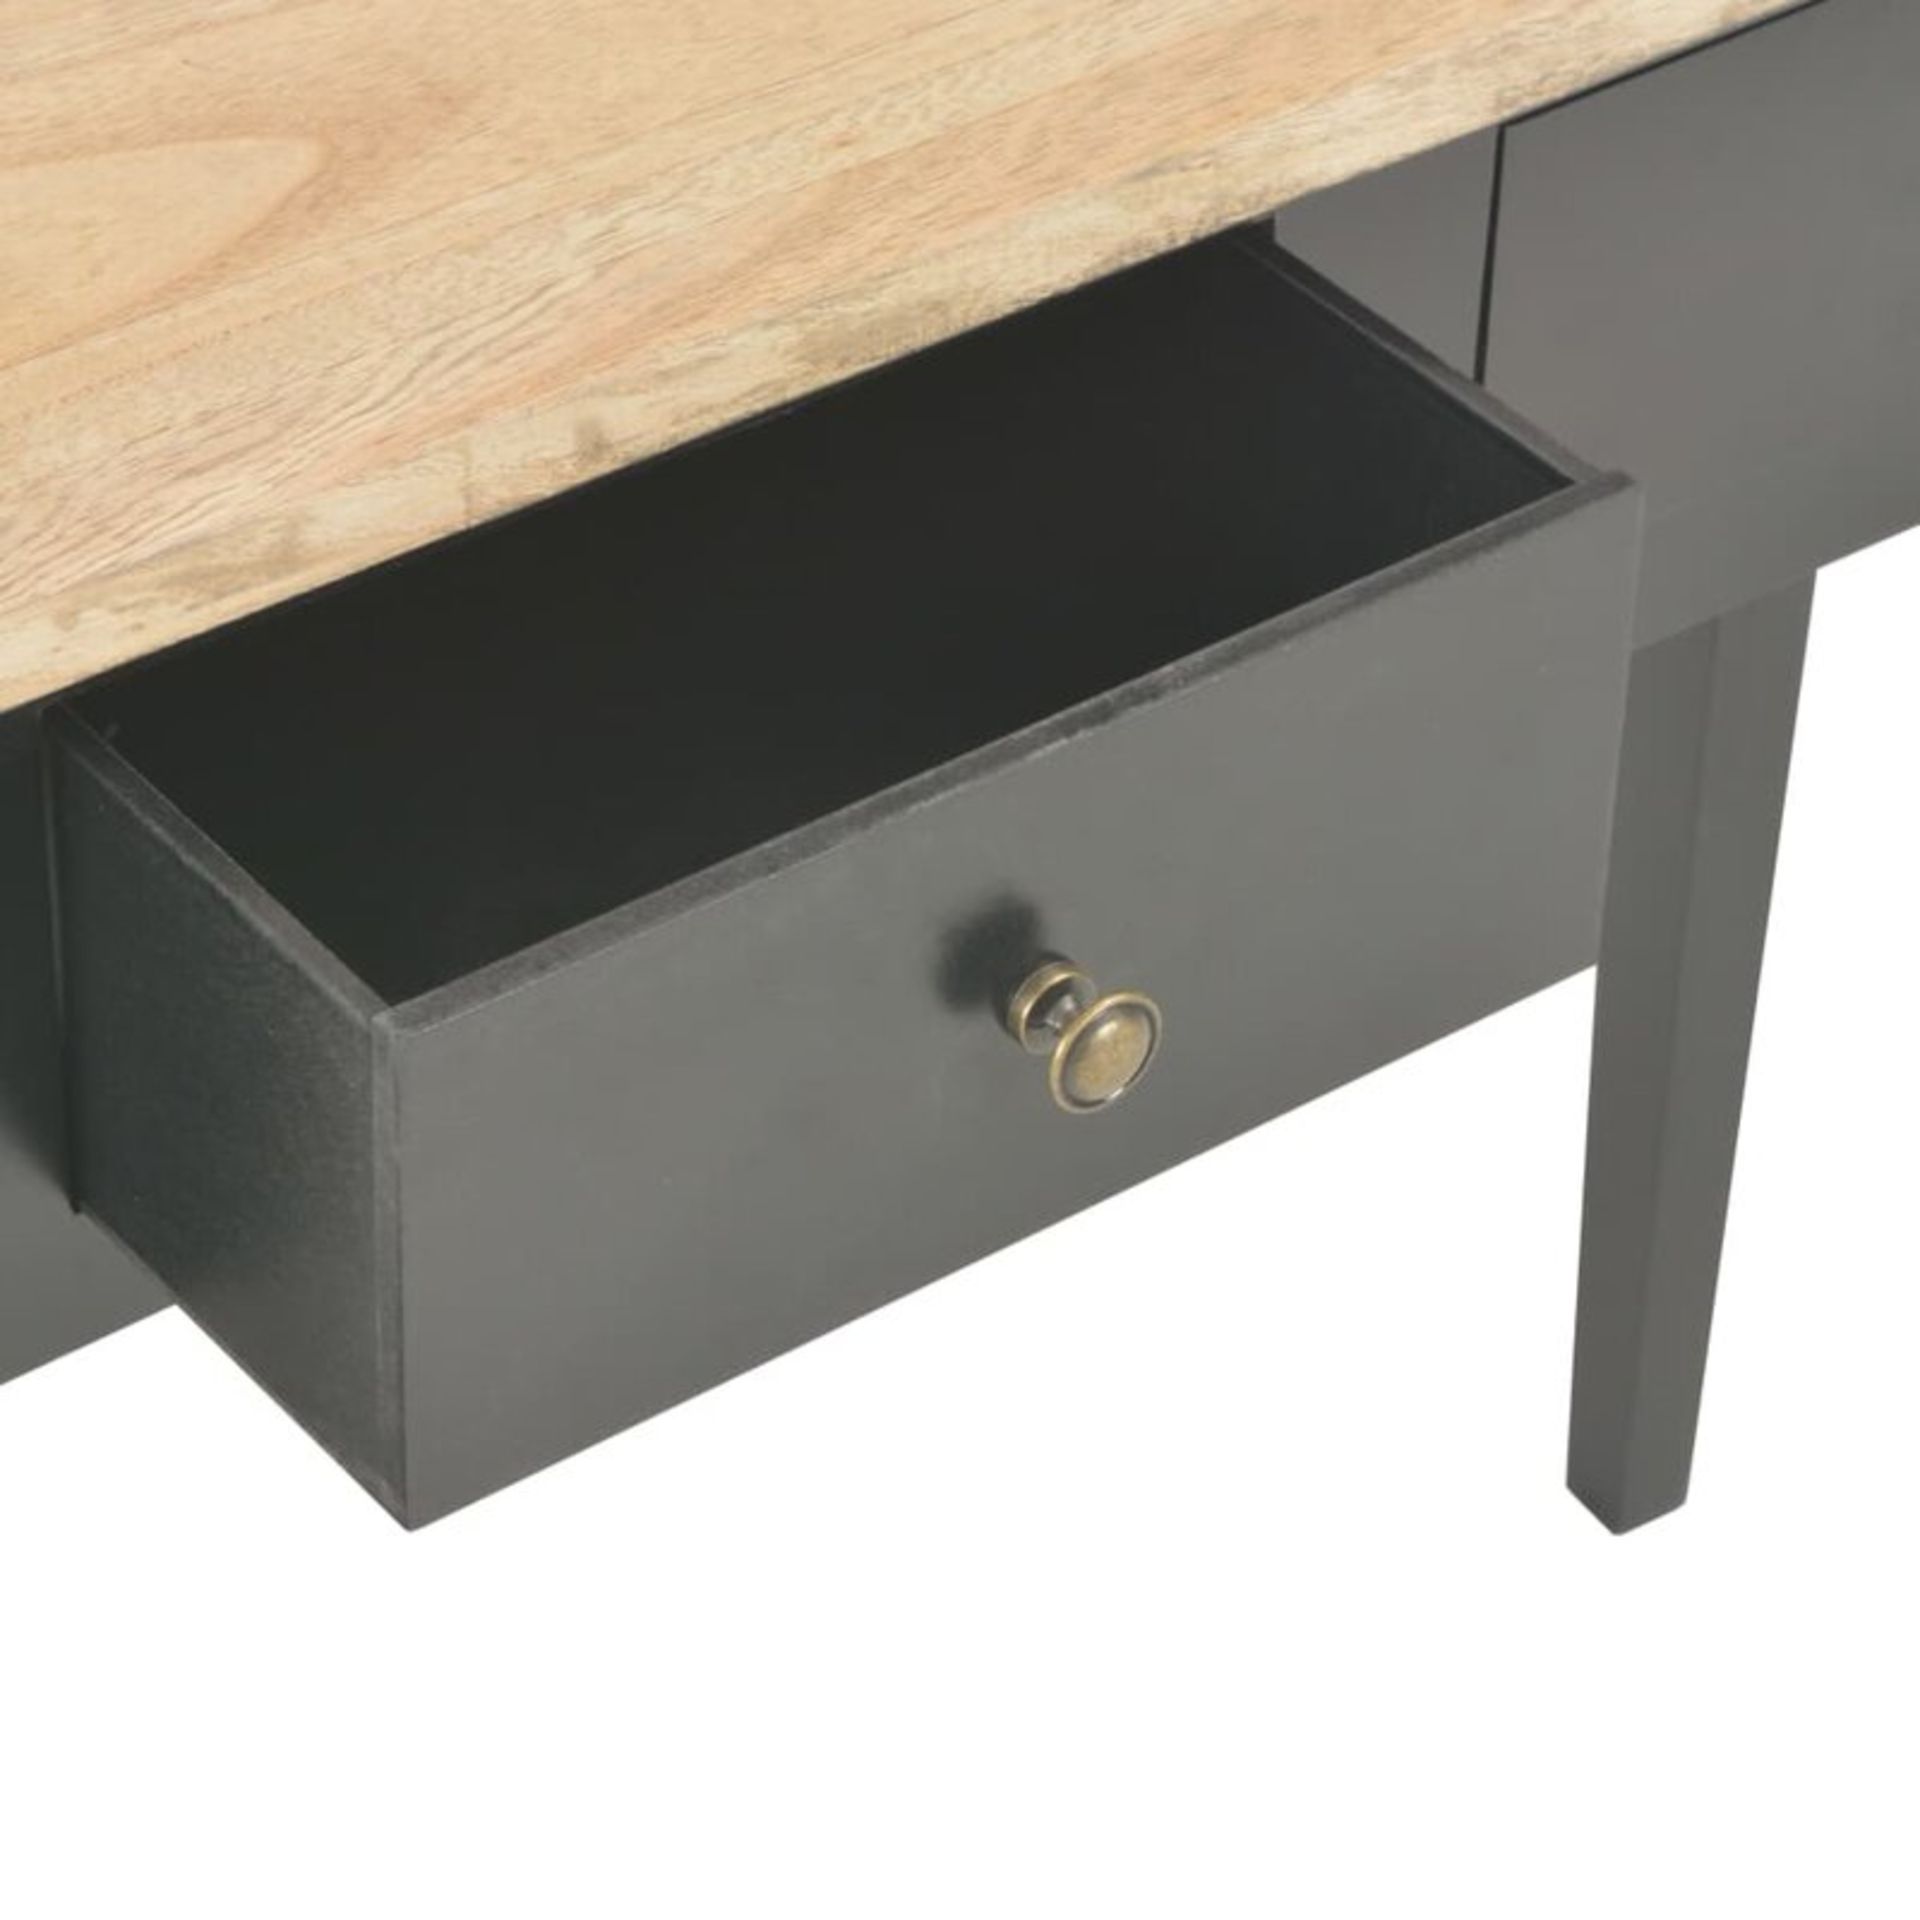 Mcgowan 30Cm Console Table RRP £149.99 - Image 2 of 2